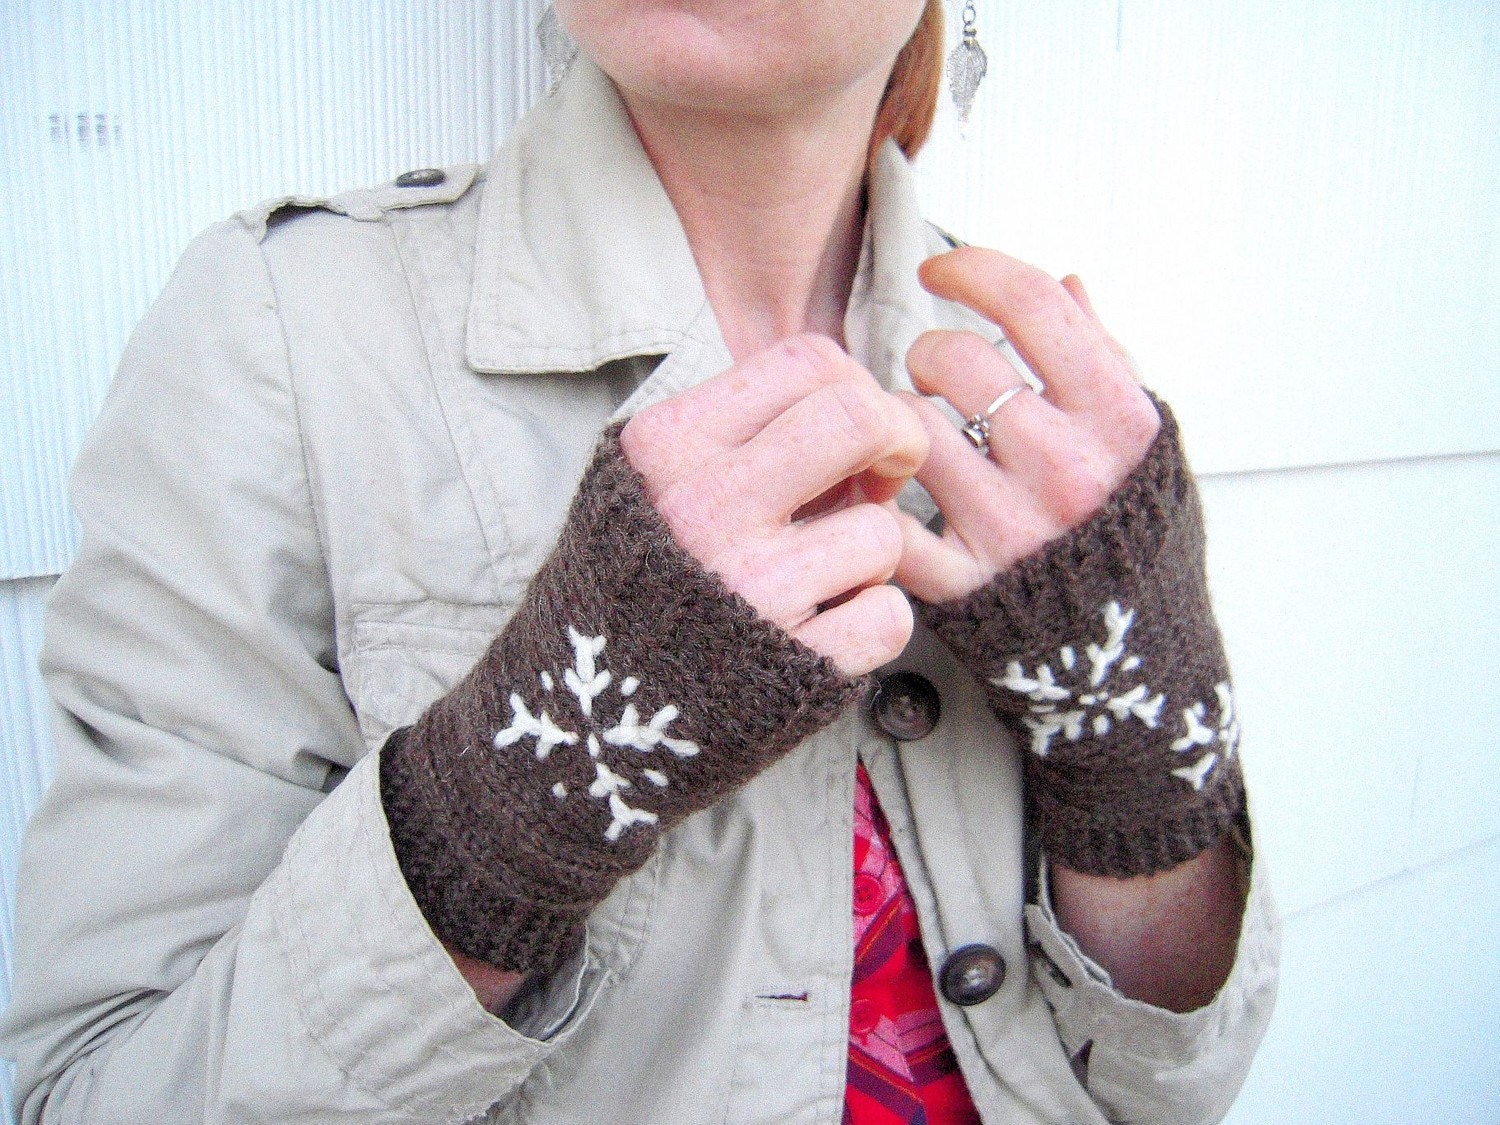 Wooly fingerless mitts, The First Snowfall free shipping